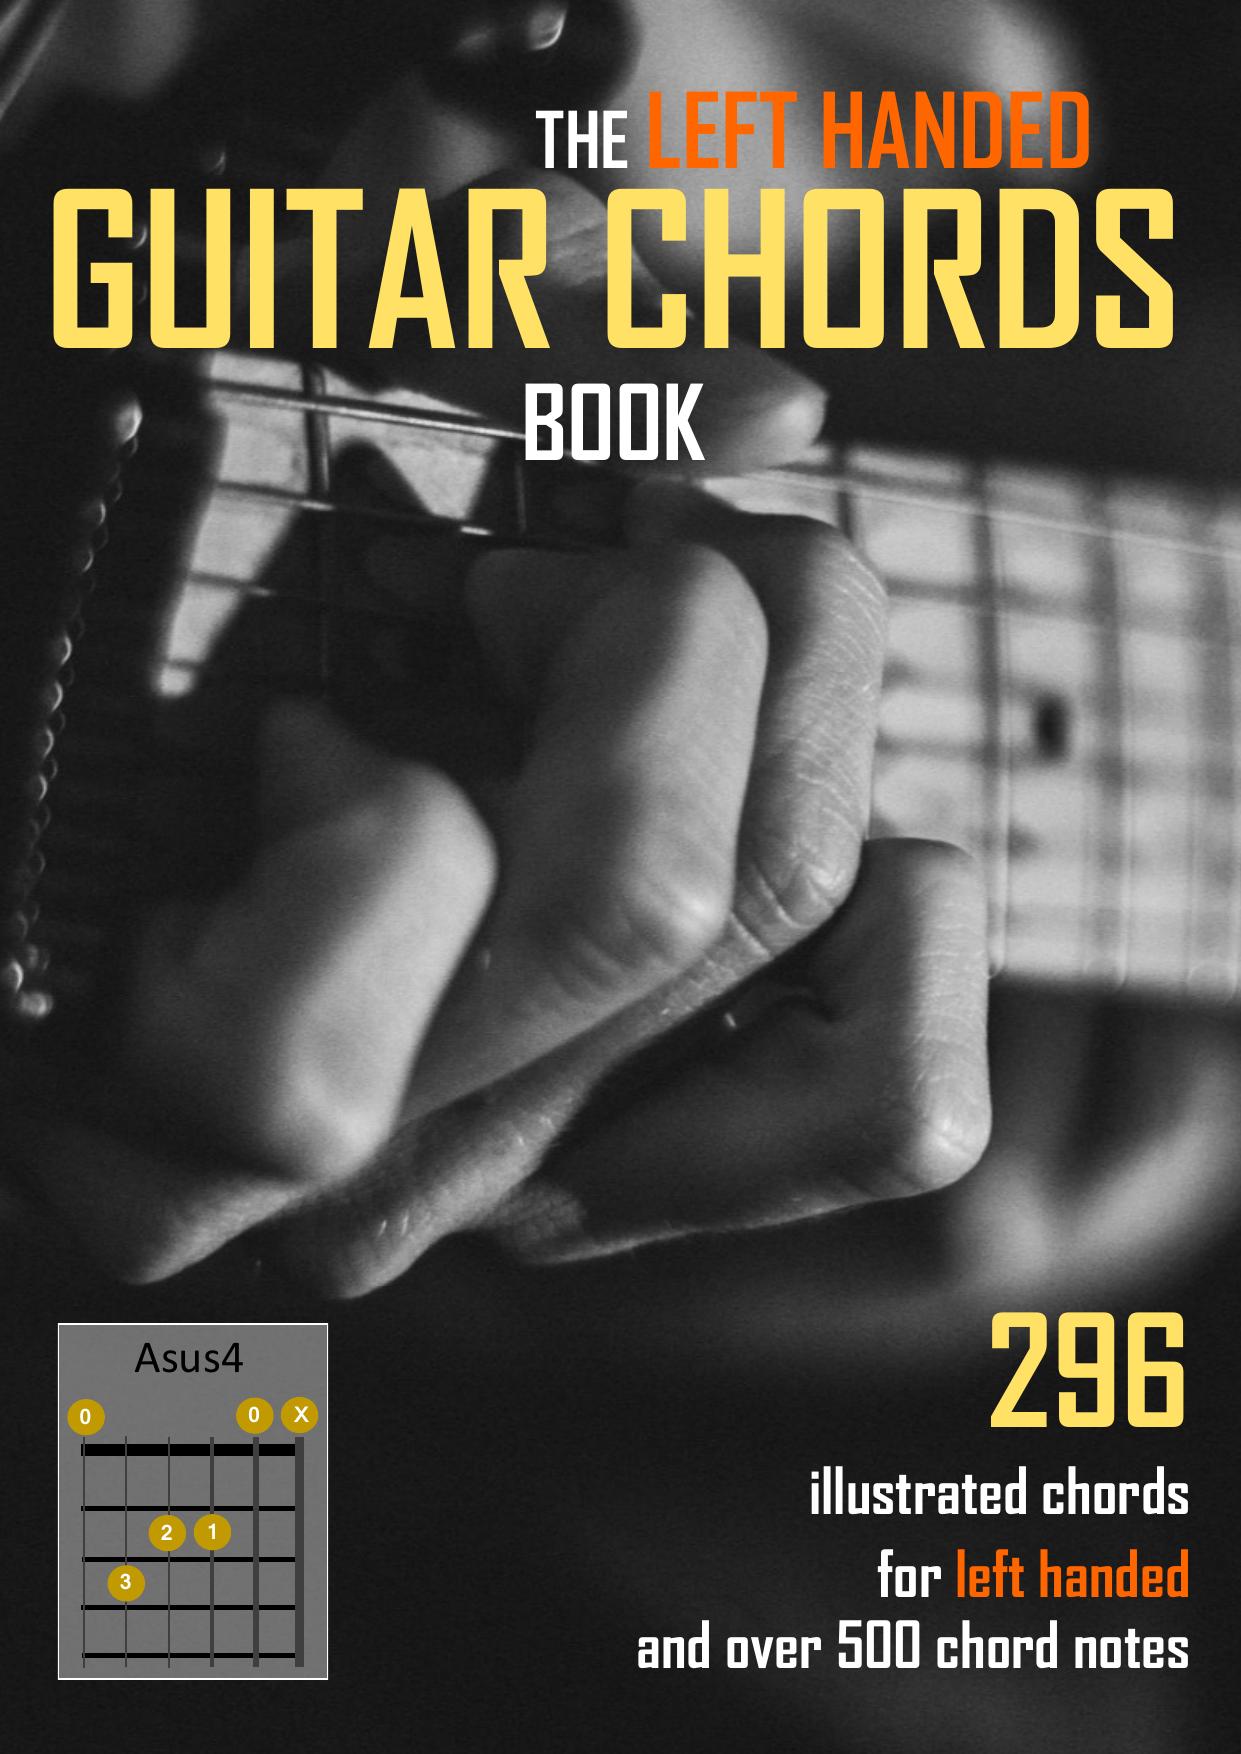 The Left Handed Guitar Chords Book: 296 illustrated chords and over 500 chord notes by E Kluitenberg